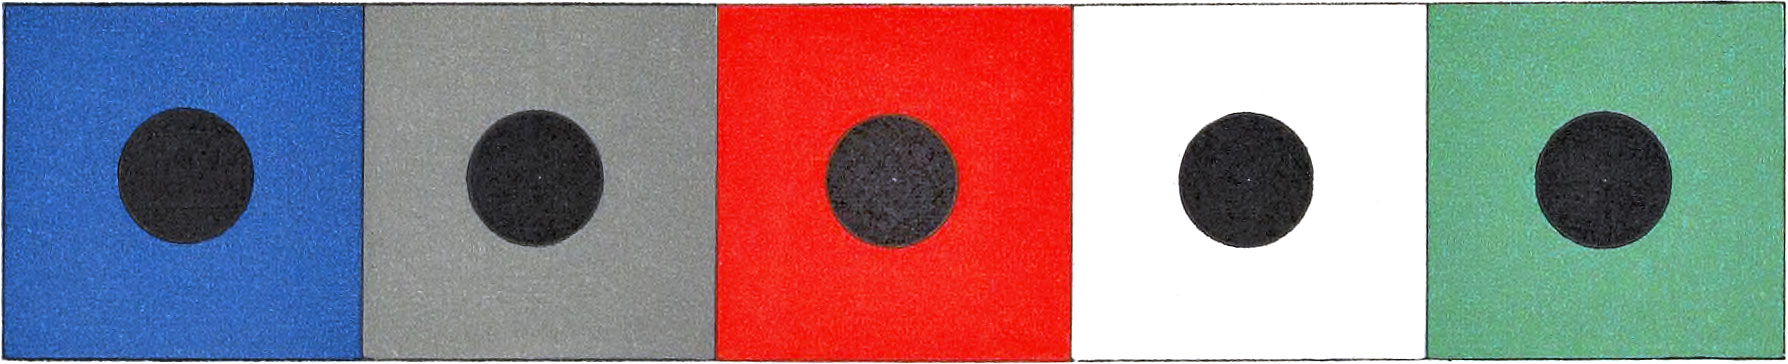 Row of five squares, blue, gray, red, white, and green with a large black circle in each